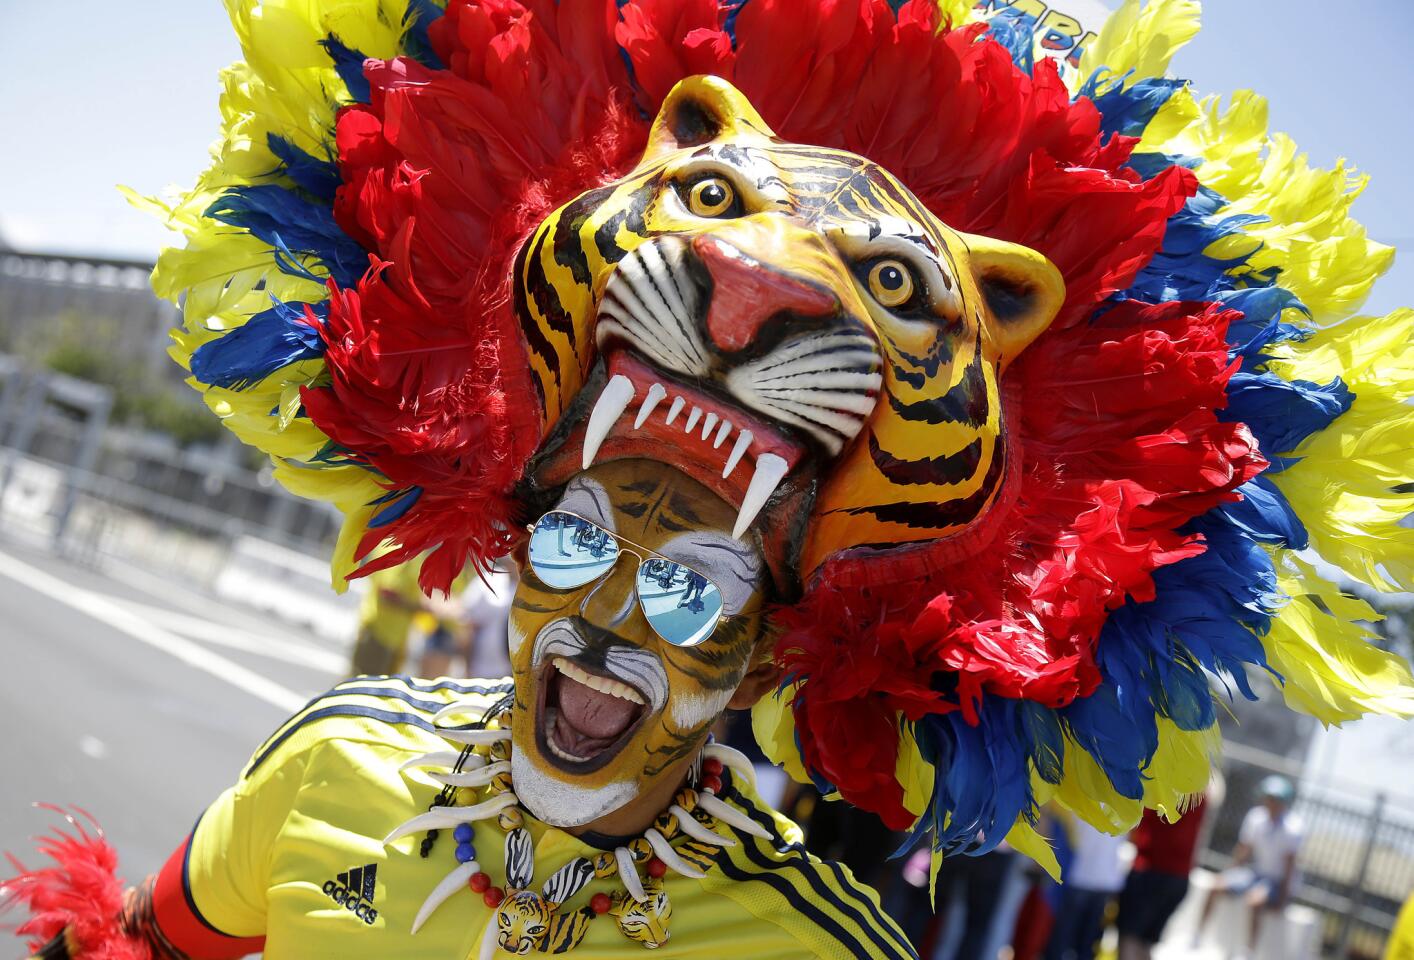 A Colombia fan smiles before a Copa America Centenario Group A soccer match between the United States and Colombia at Levi's Stadium in Santa Clara, Calif., Friday, June 3, 2016. (AP Photo/Marcio Jose Sanchez)